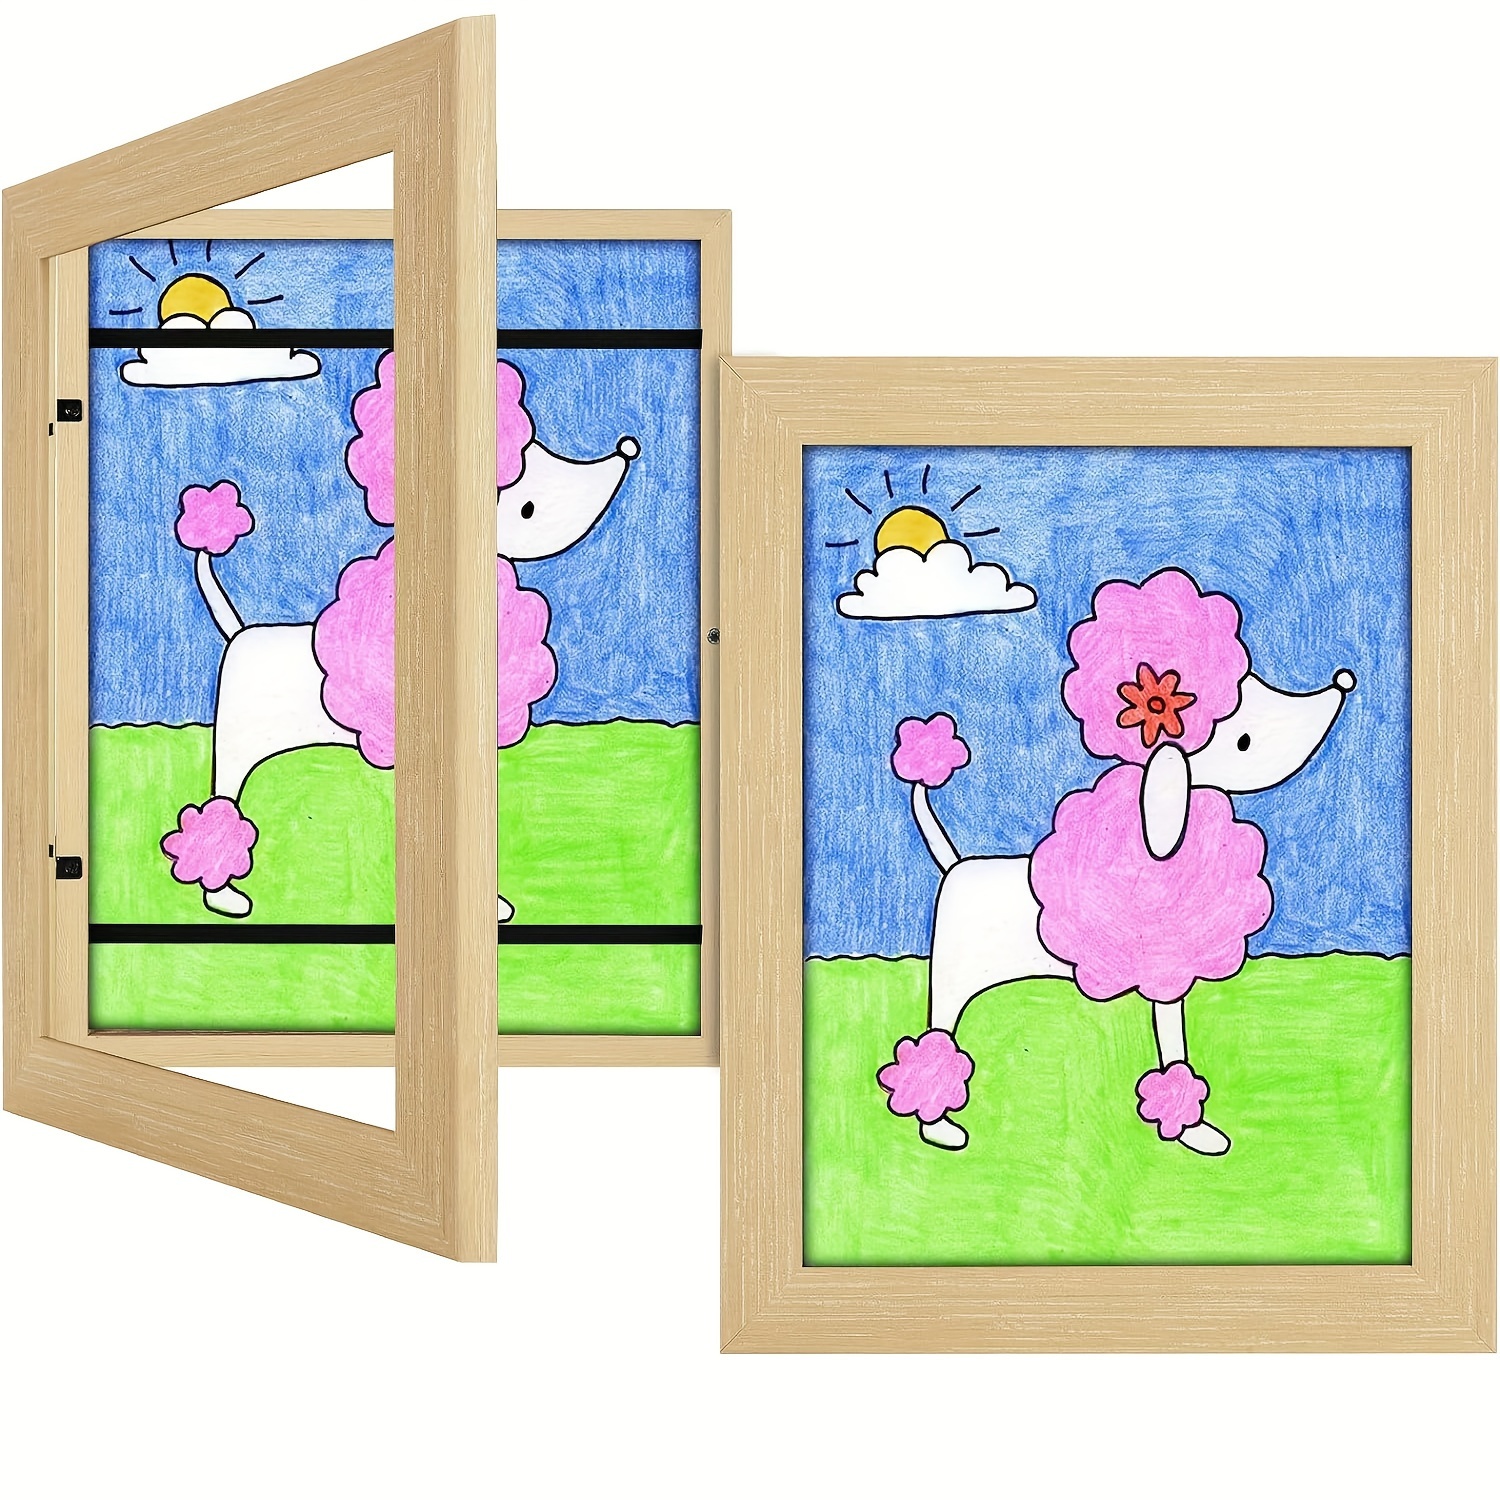 Kids Artwork Frames and Storage Box, 8.5x11 Set of 2, Picture for Children Art Projects, Drawing and Schoolwork, Front-Opening Kids Artwork Storage